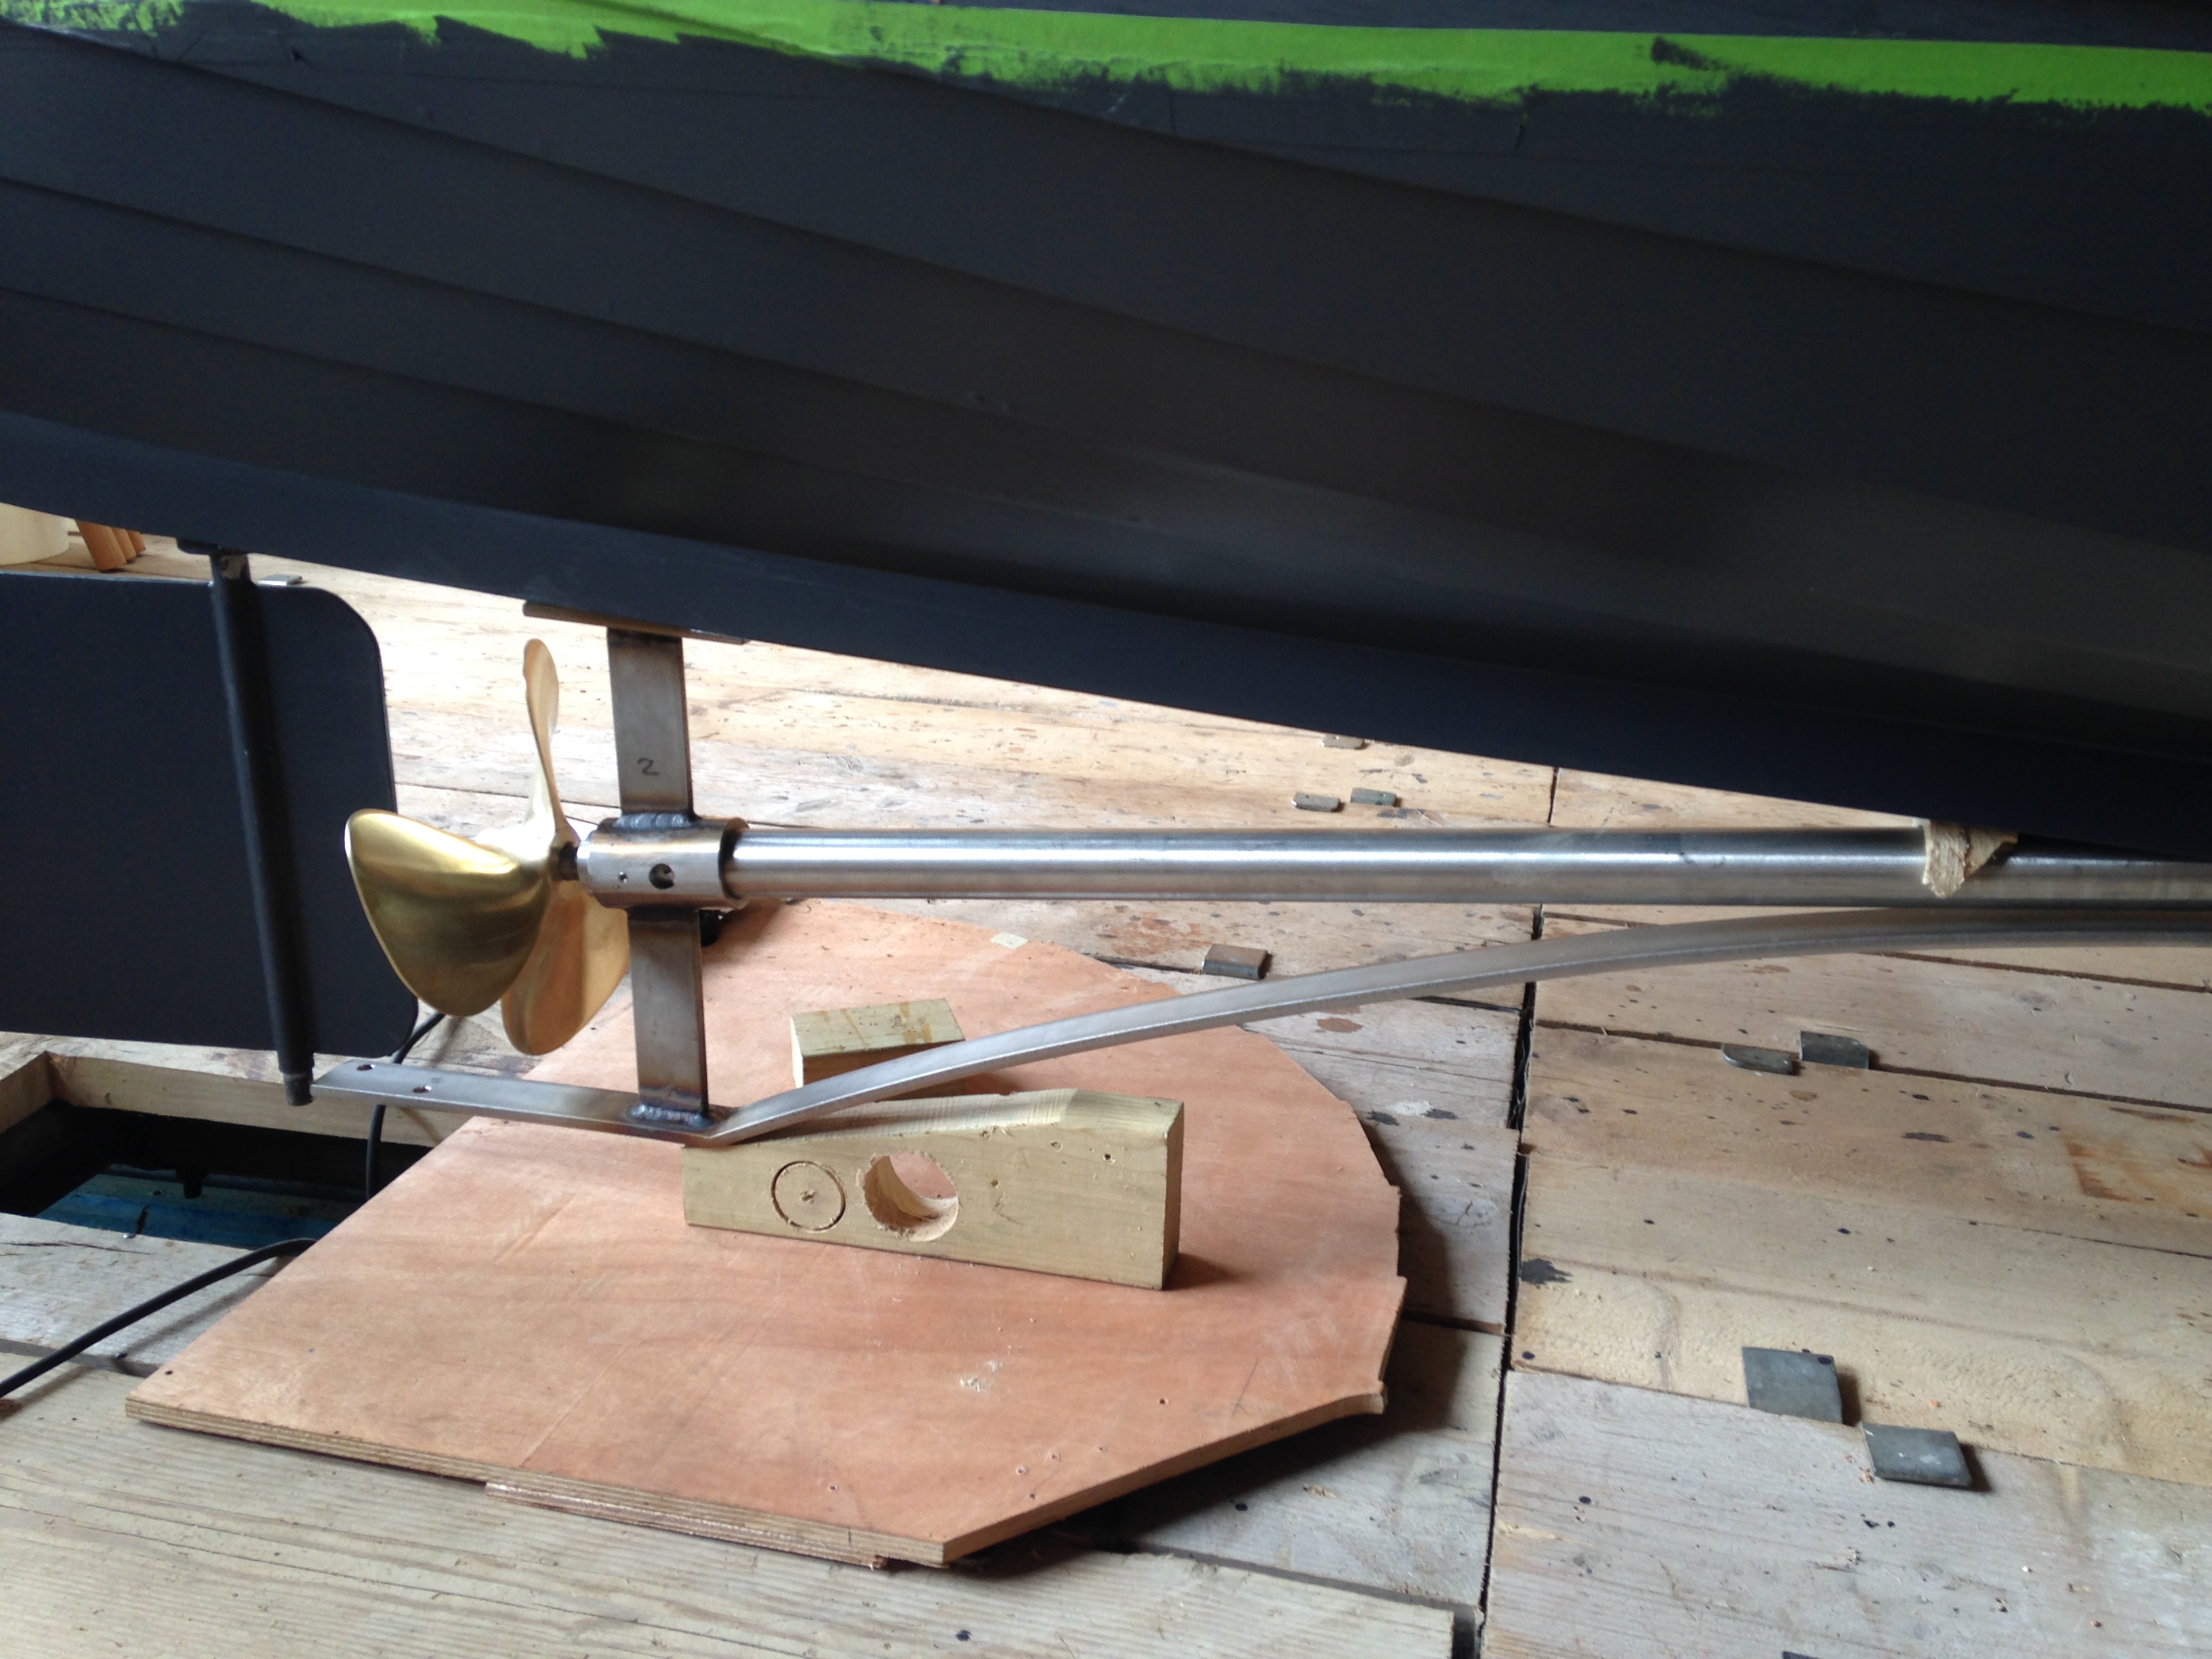 fitting out and stern gear. – seb vanden bogaerde